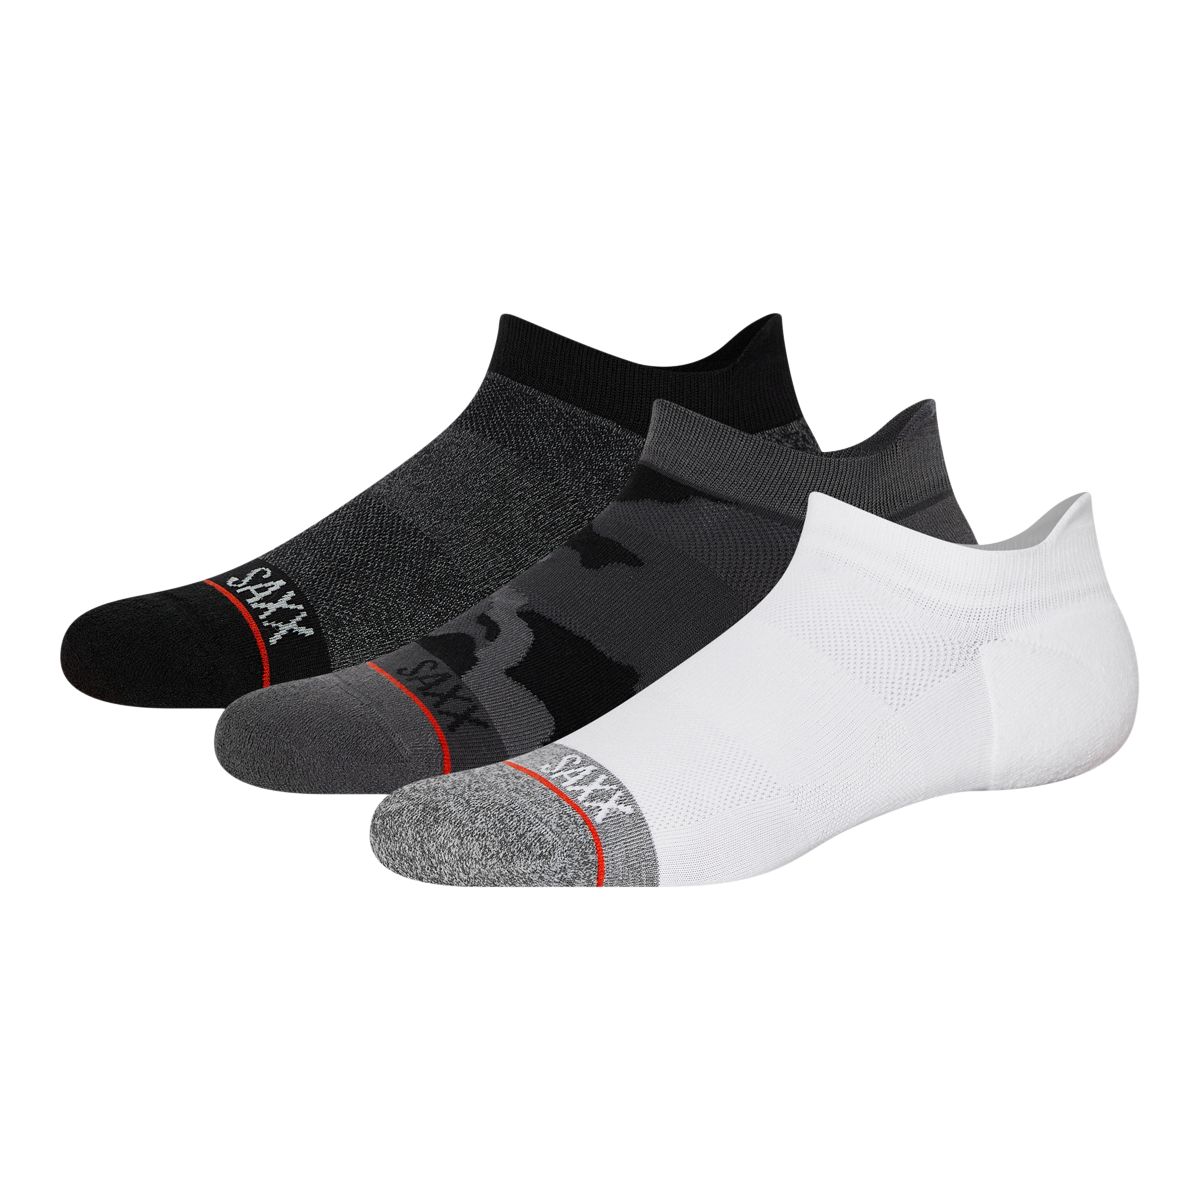 SAXX Whole Package Ankle Socks - 3 Pack | SportChek